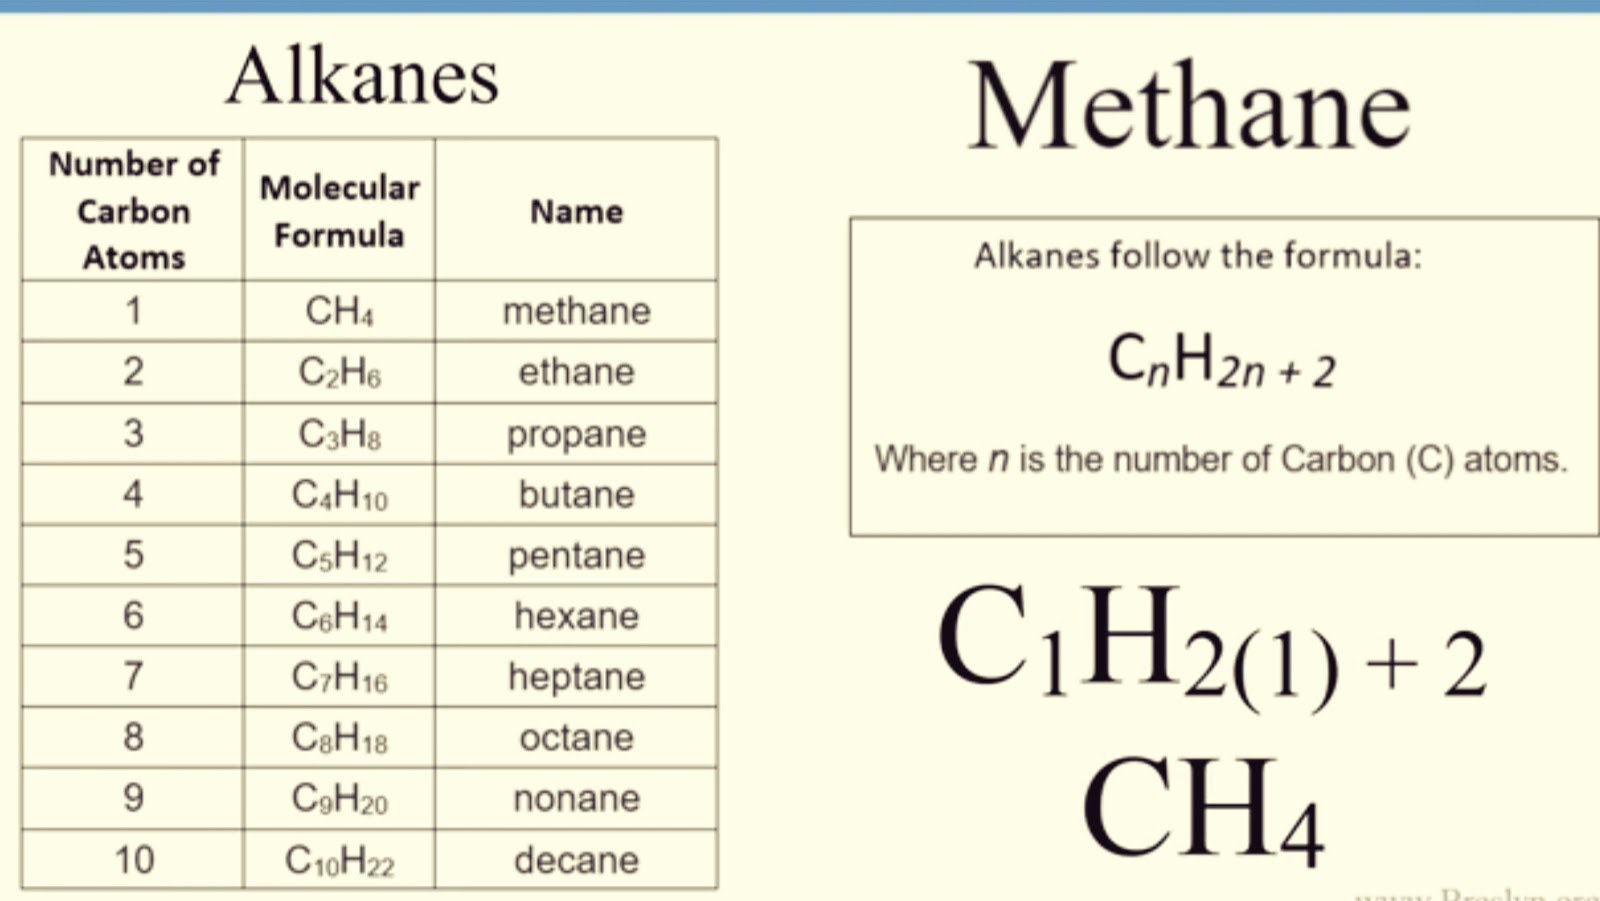 Methane FormulaWhat is the Chemical Formula for Methane?